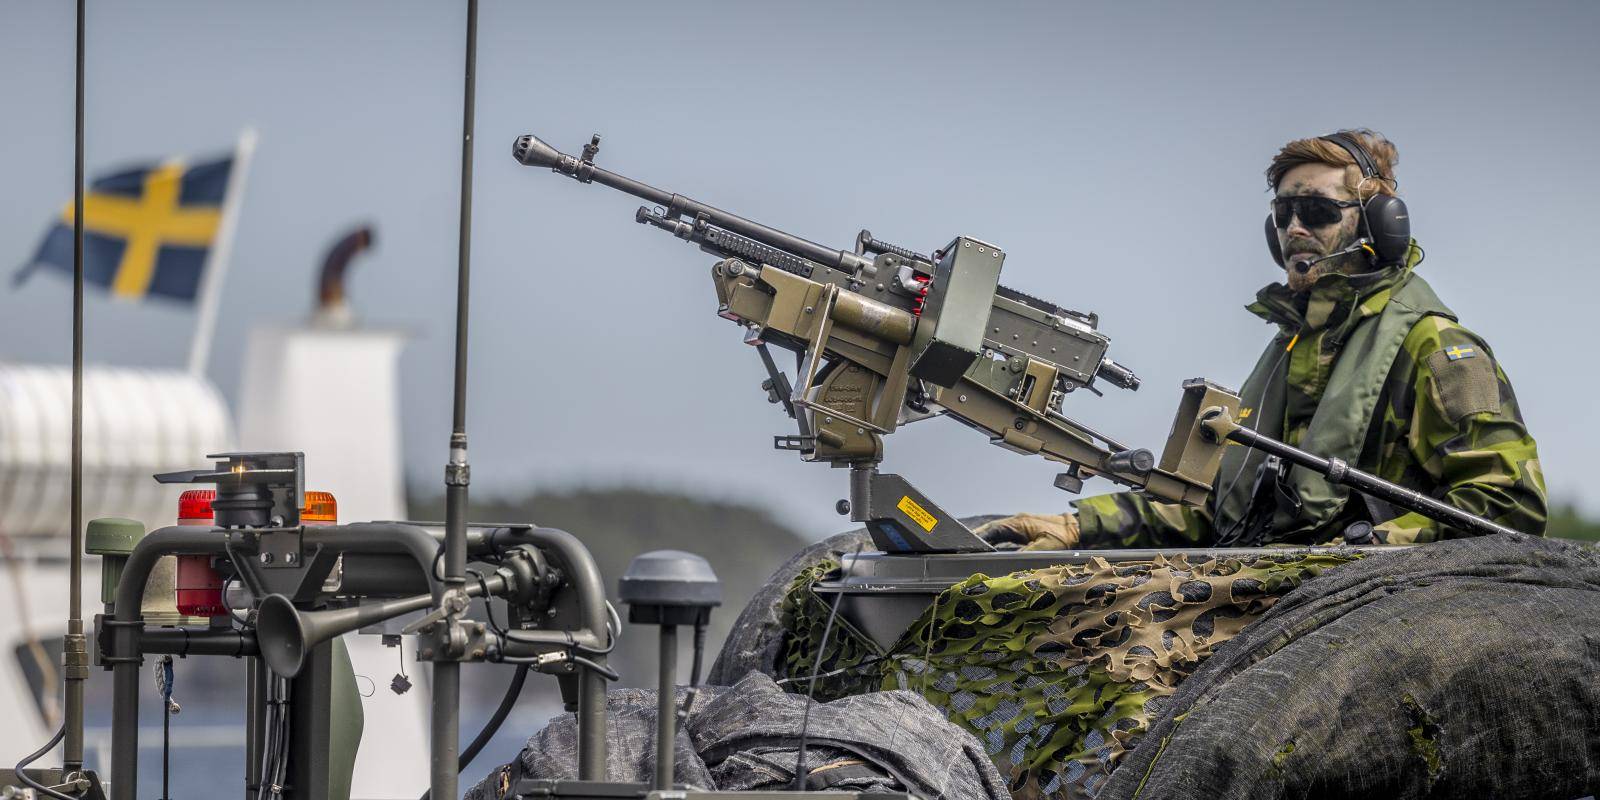 Sweden brings benefits for NATO but accession delay raises difficult  questions | Chatham House – International Affairs Think Tank